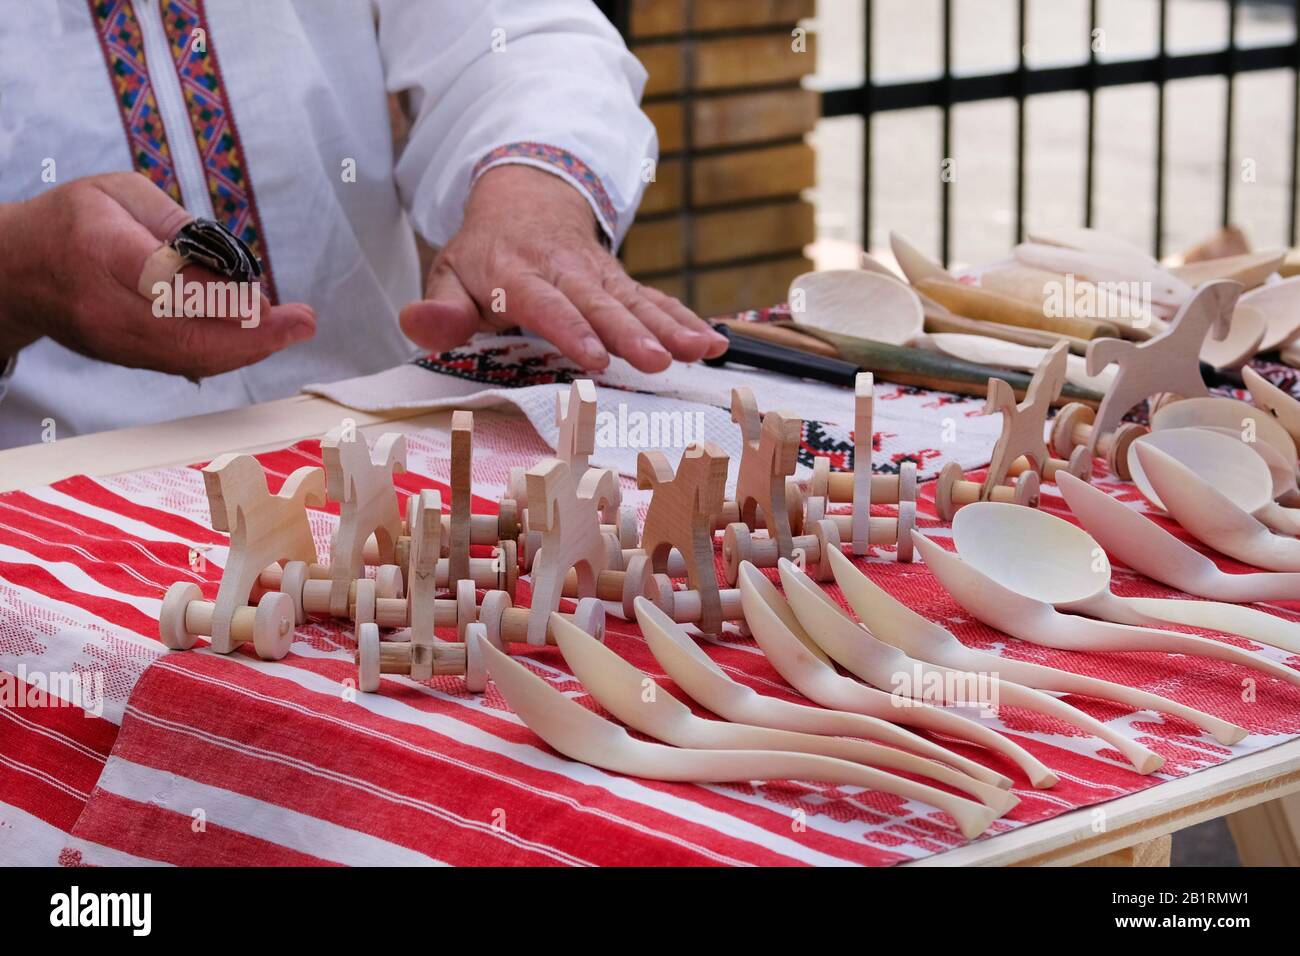 Craftsman put up for sale wooden hand-made toys and spoons. National crafts concept. Stock Photo